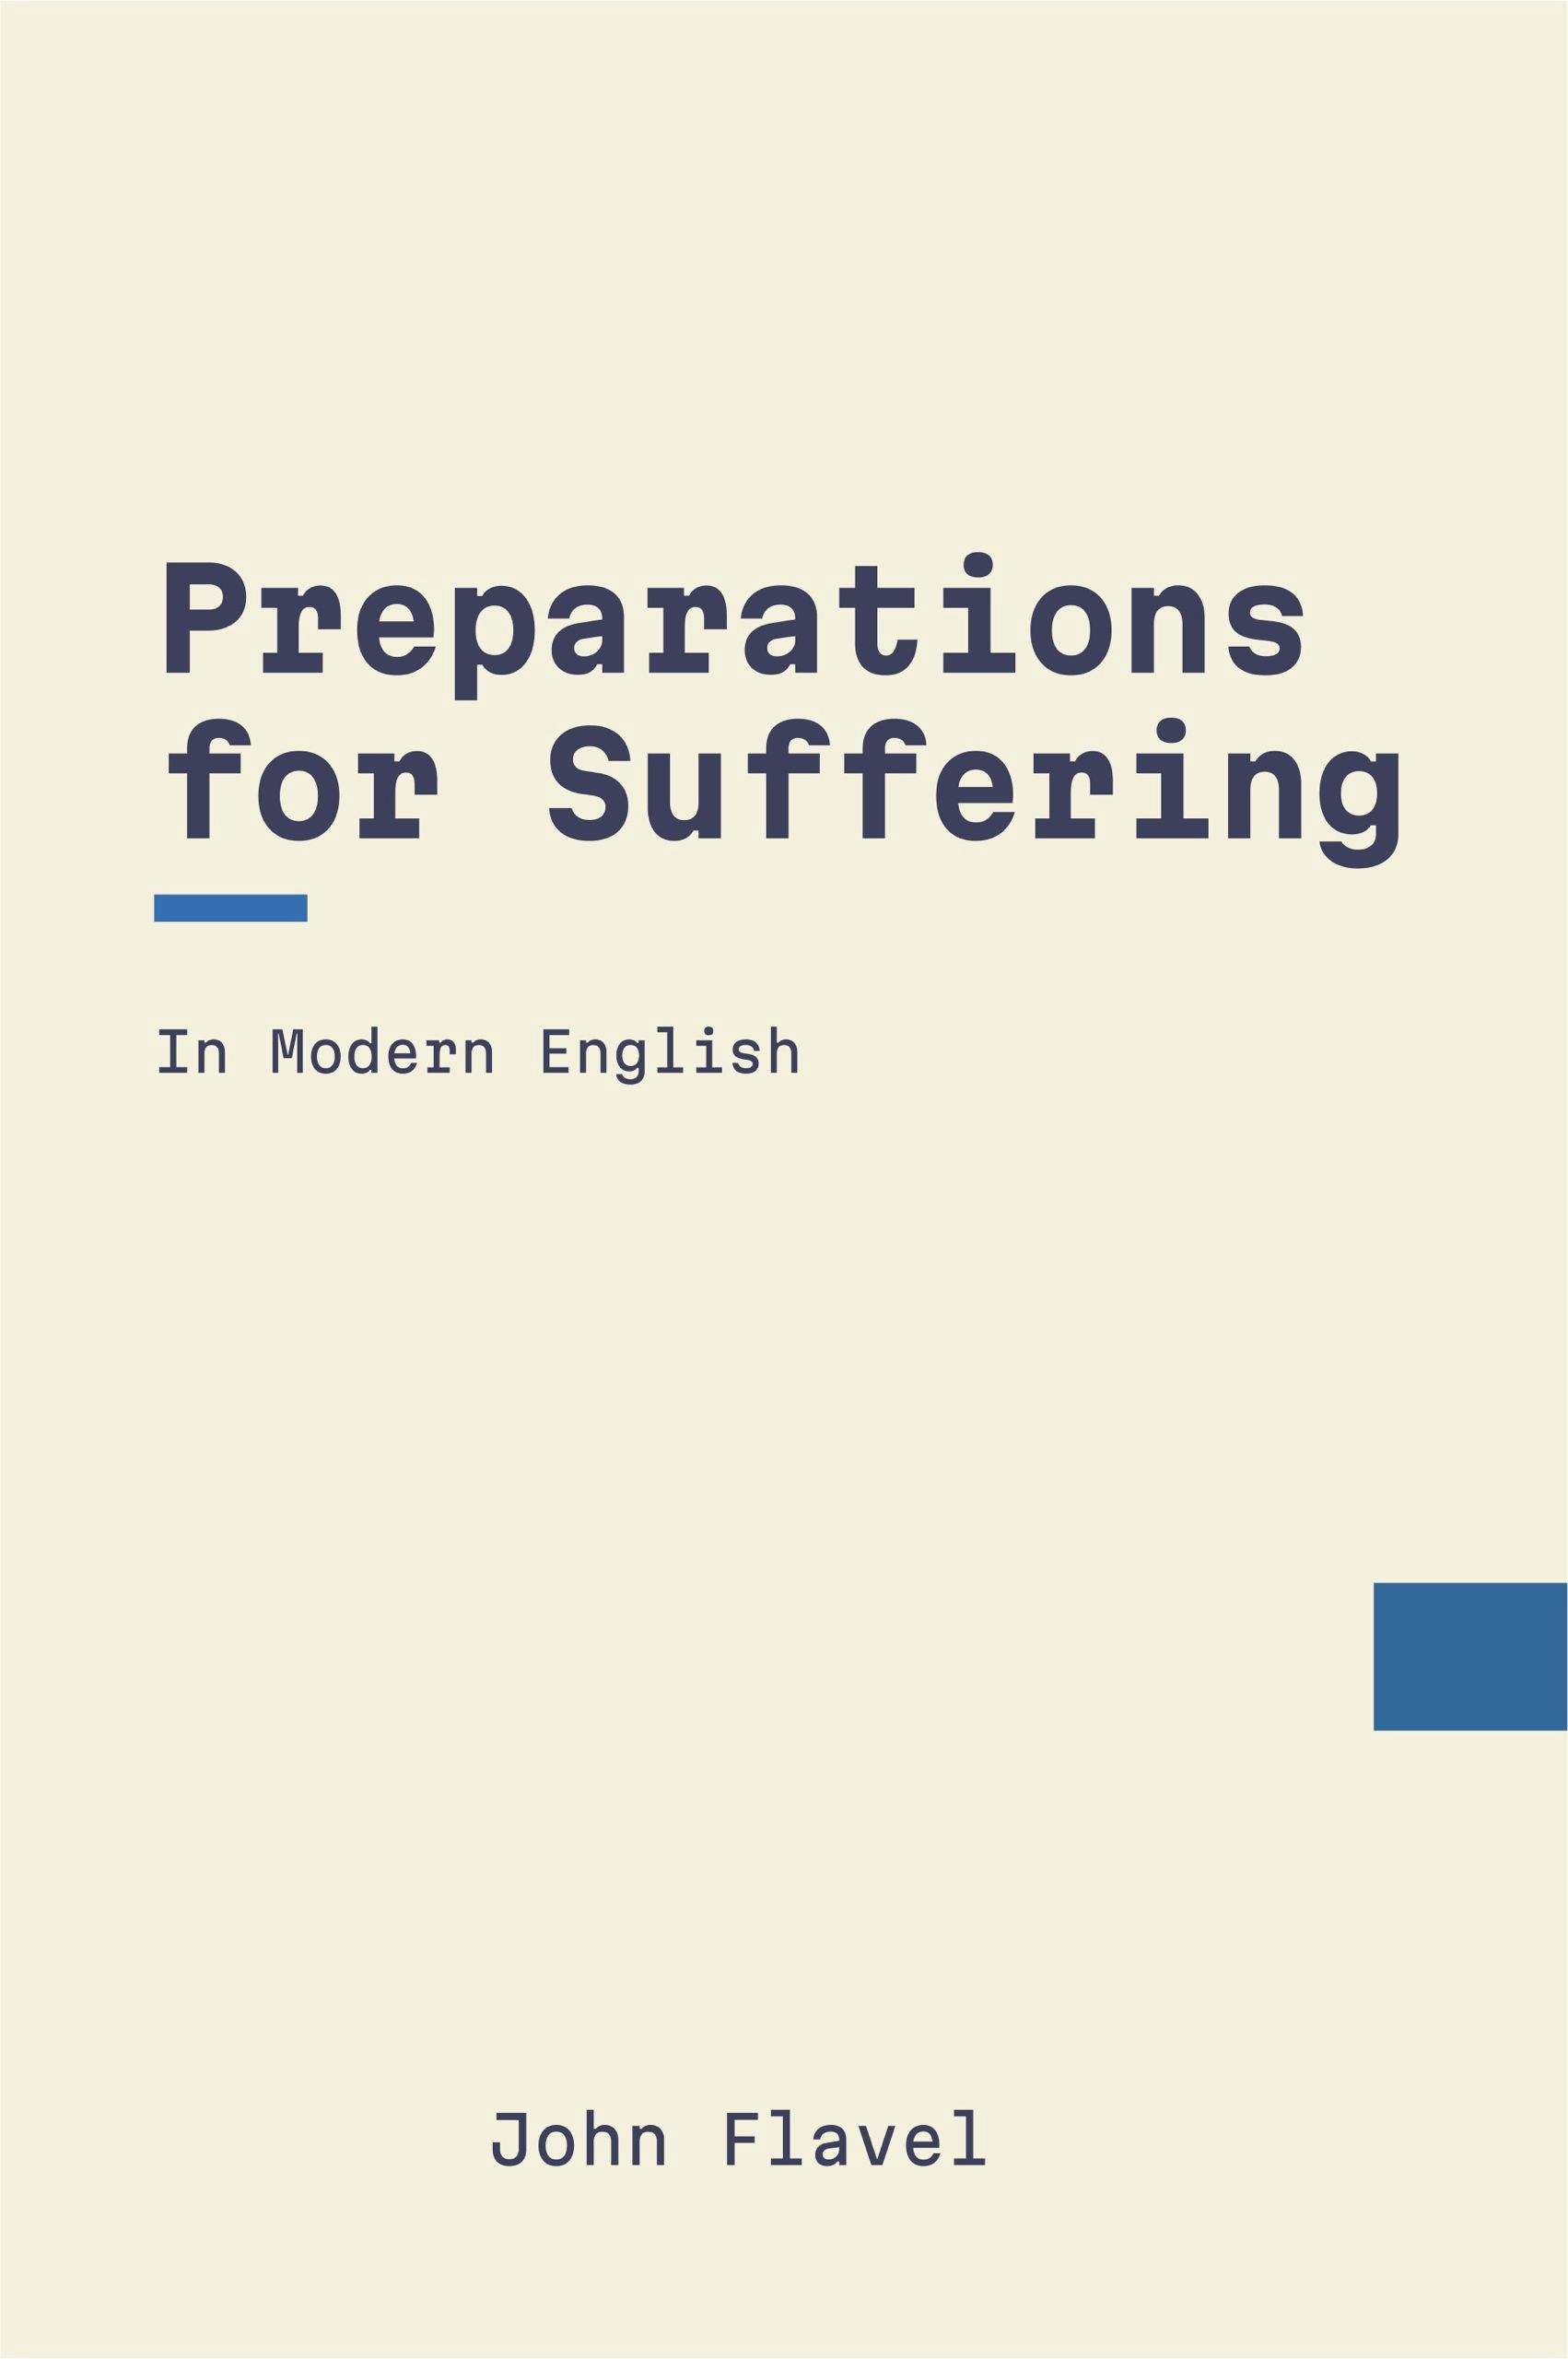 Preparations for Suffering by John Flavel (Modern English)